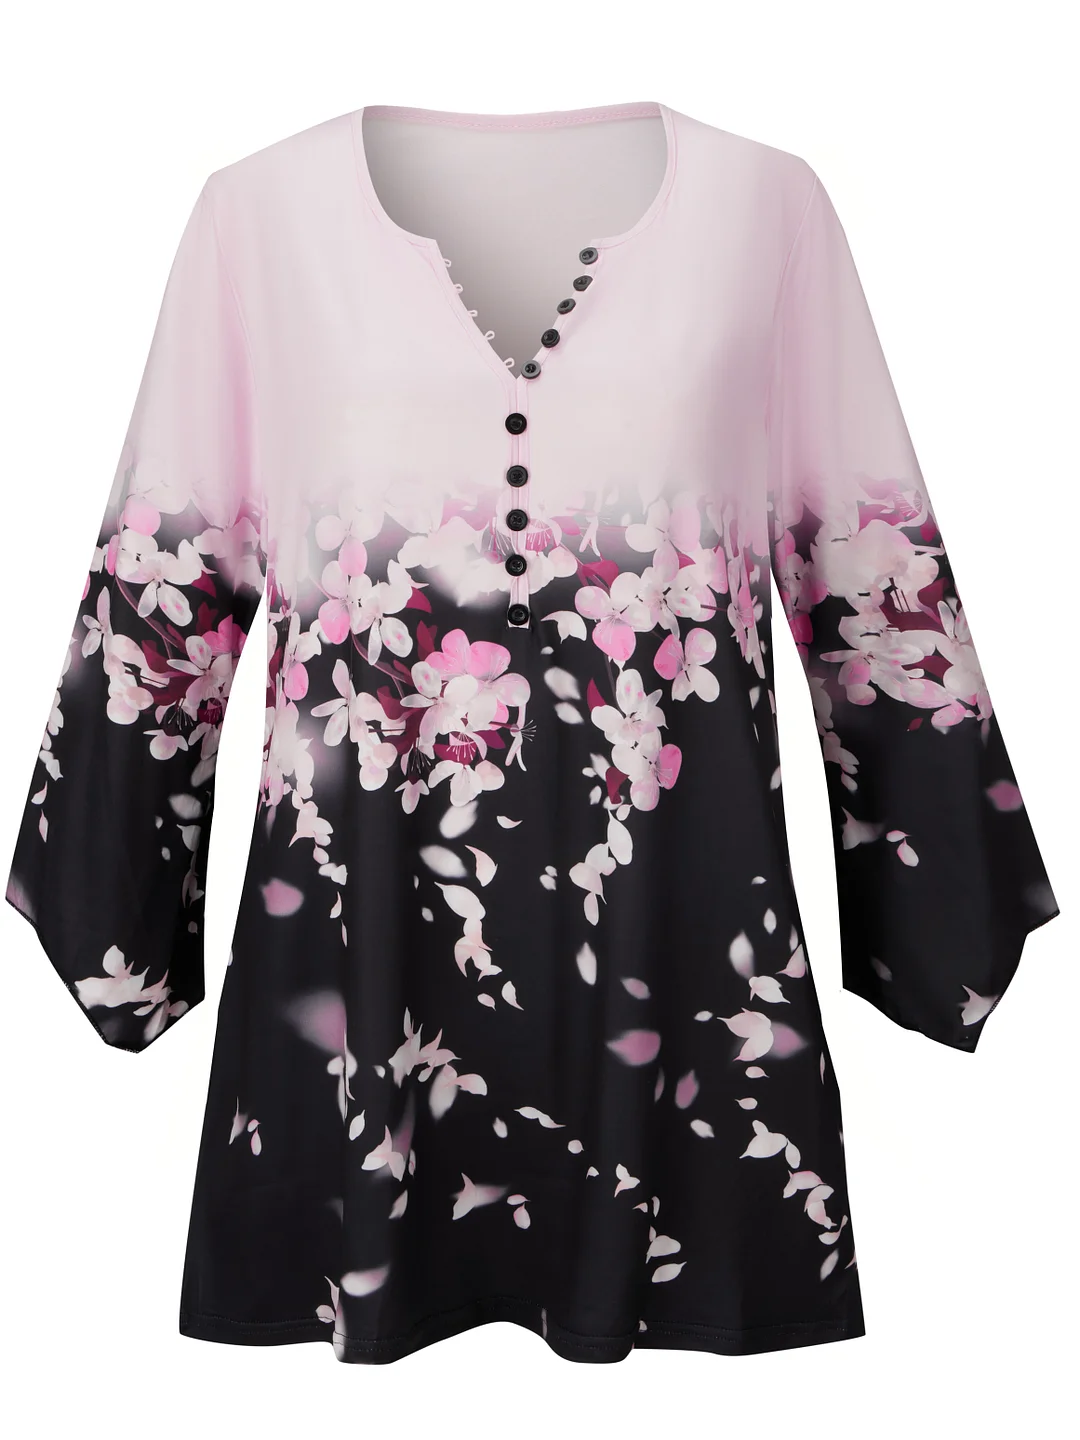 Style & Comfort for Mature Women Women 3/4 Sleeve V-neck Colorblock Gradient Floral Printed Tops